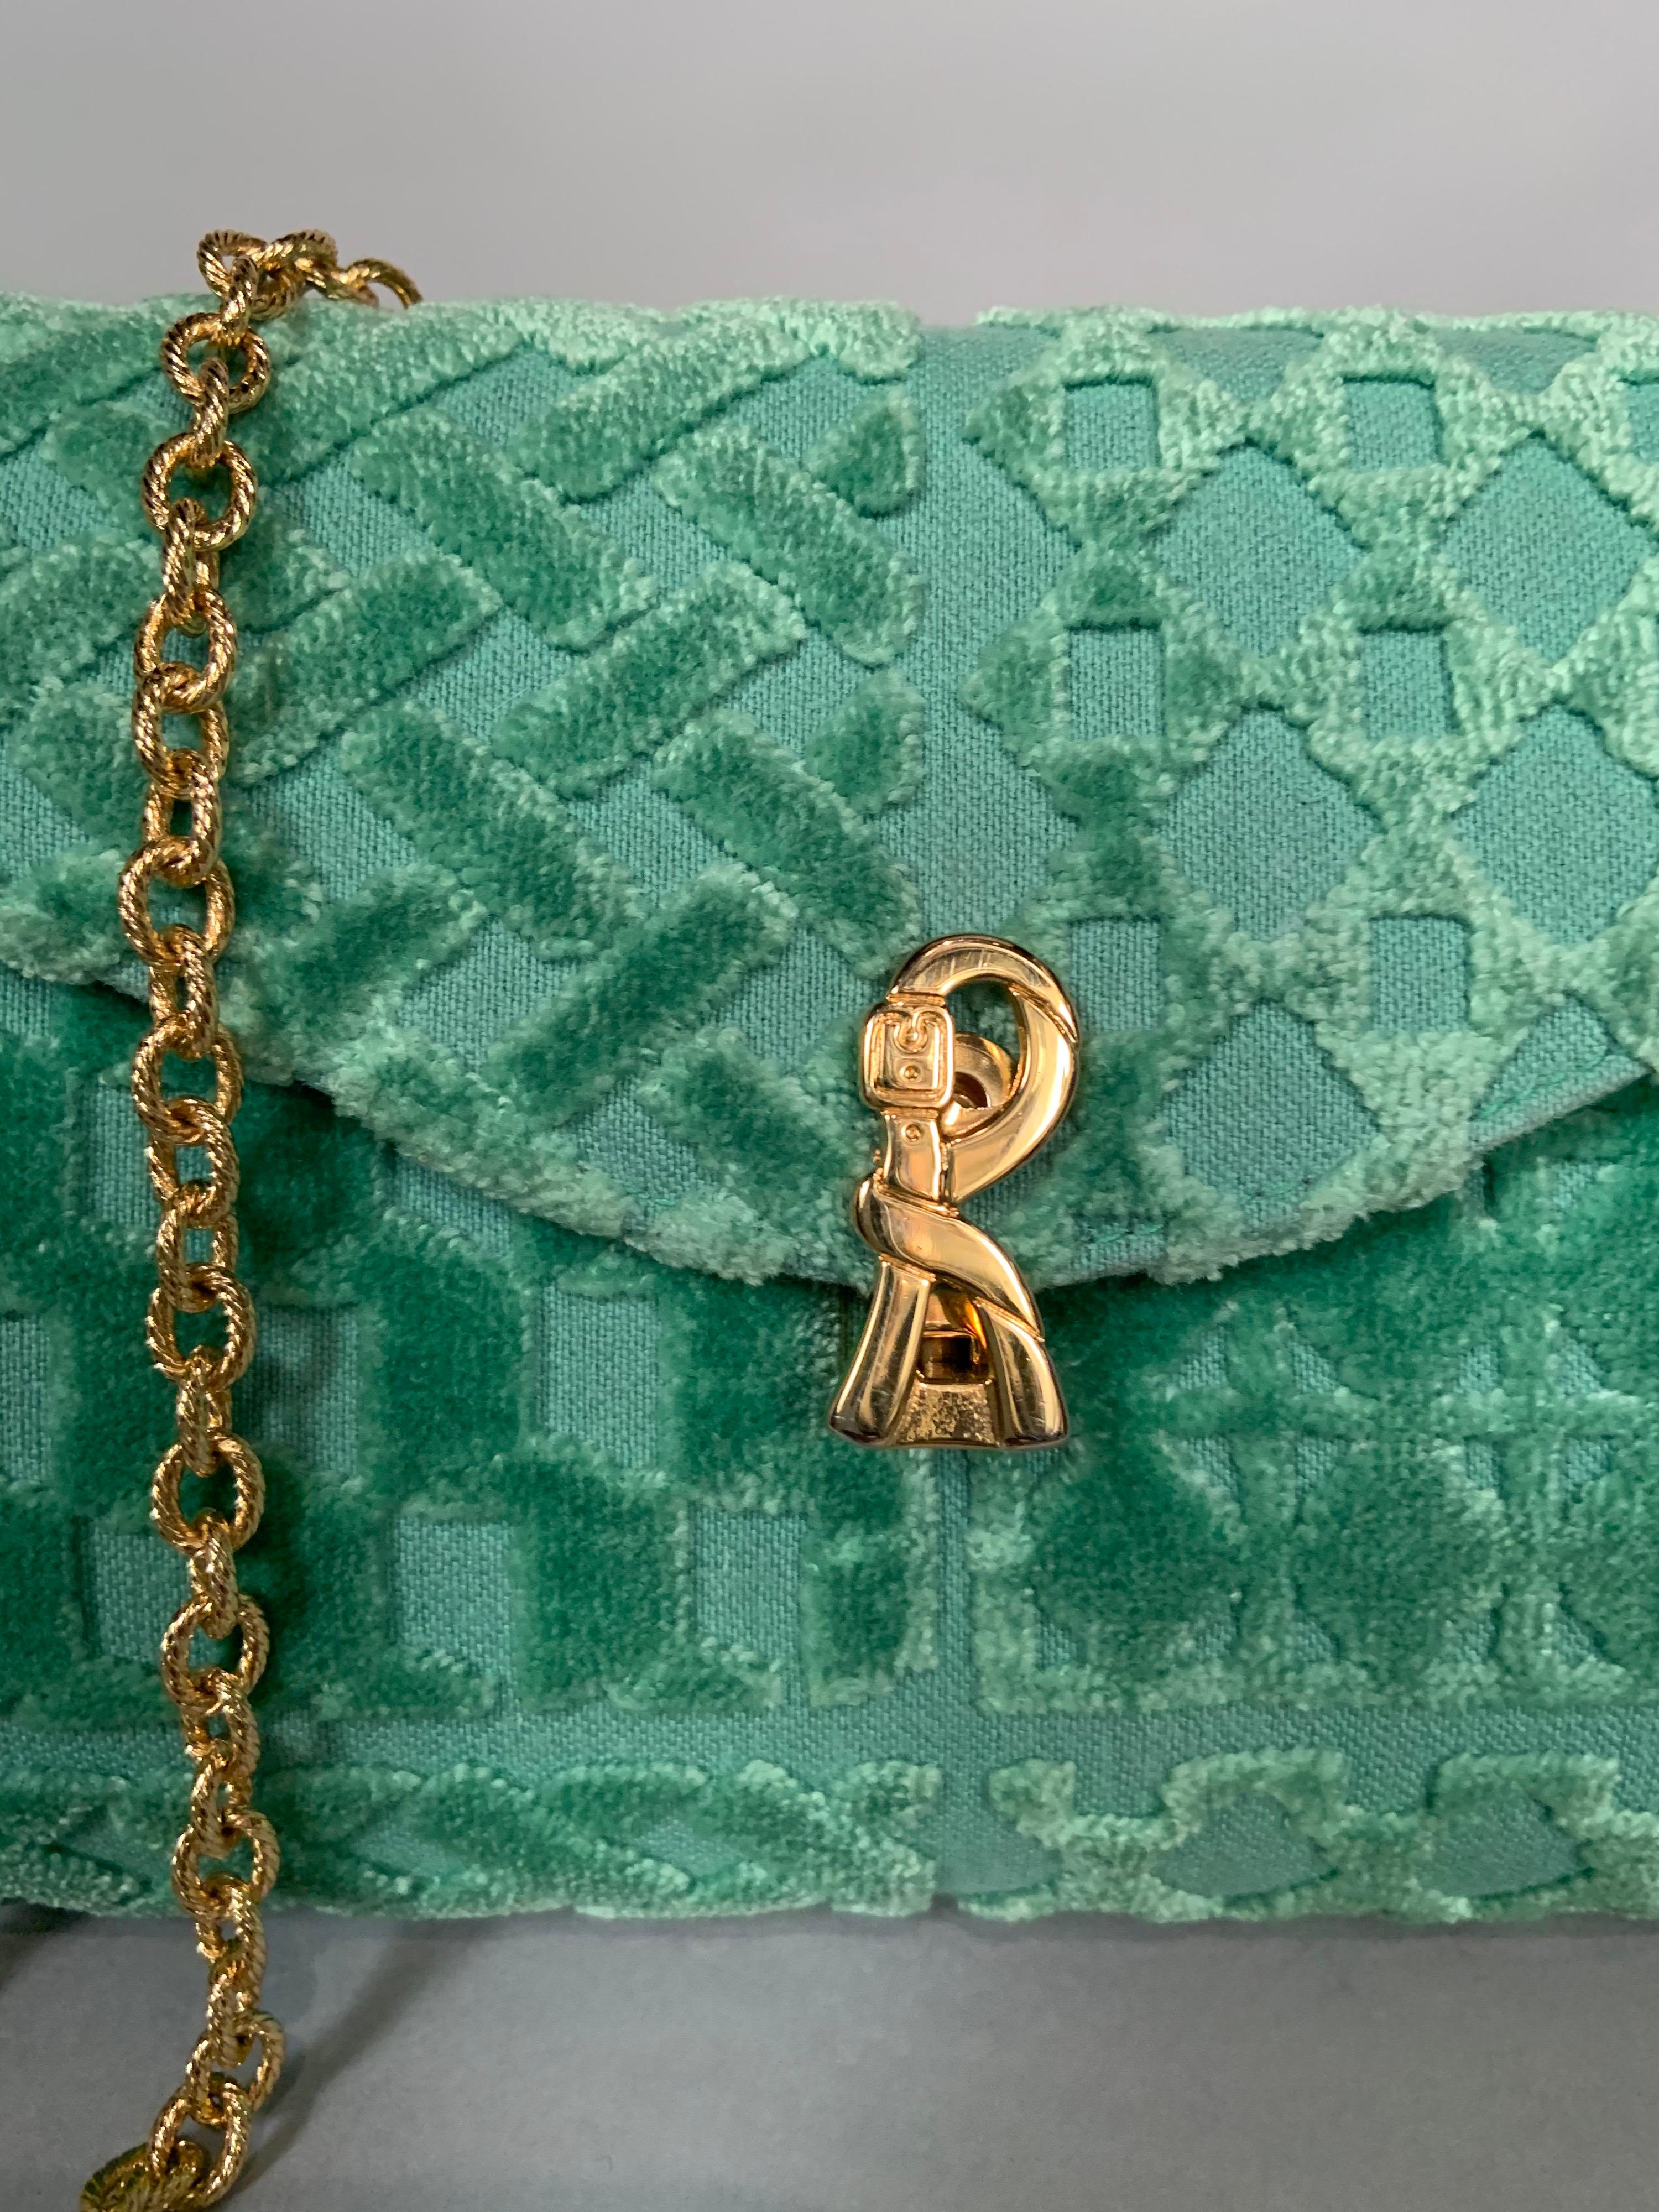 This Roberta di Camerino  bag is a great pop of color and it would work equally well with light or dark outfits. The clasp is the signature R belt logo in gold toned metal. The interior is pristine green silk faille. There is one large slip pocket